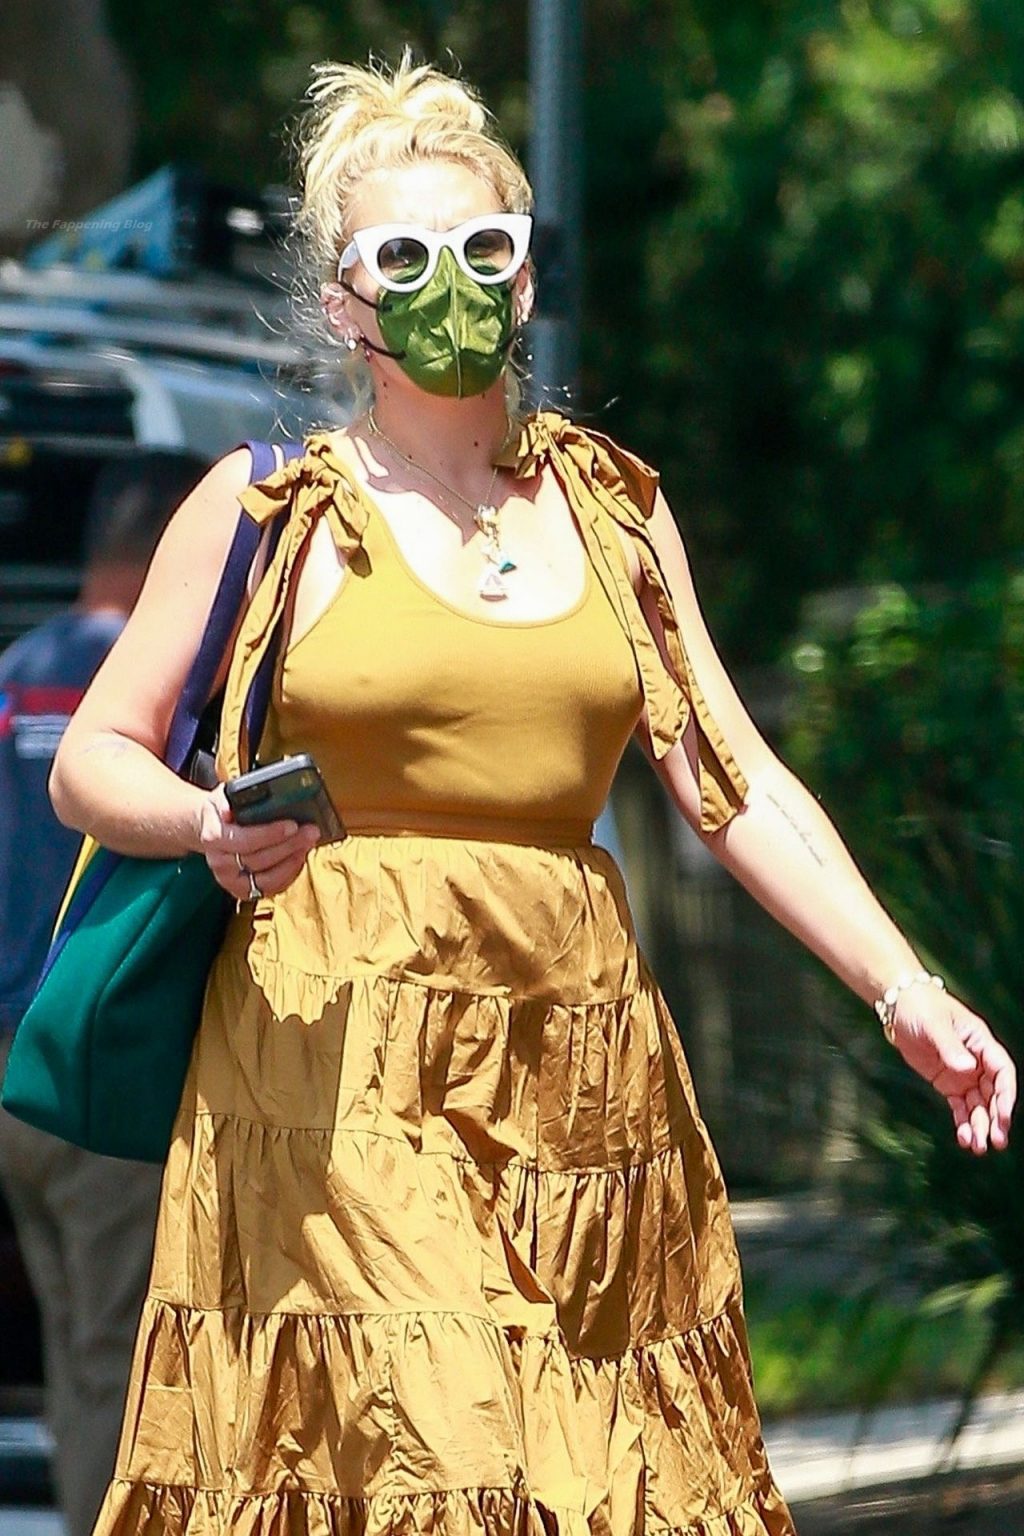 Braless Busy Philipps Looks Radiant in Yellow While Visiting a Friend in Los Feliz (11 Photos)